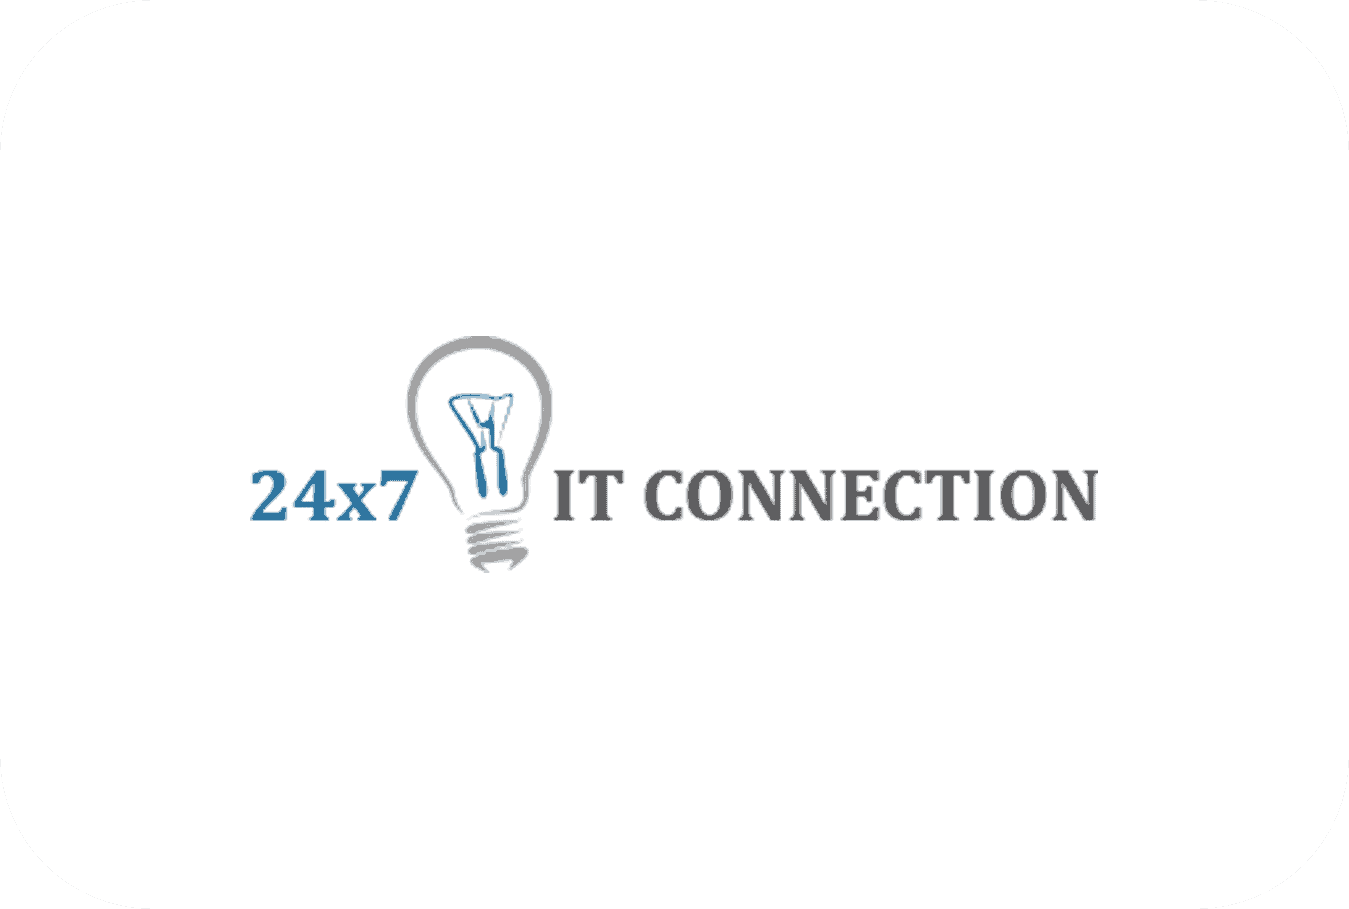 Logo for the technology blog 24x7 IT Connection